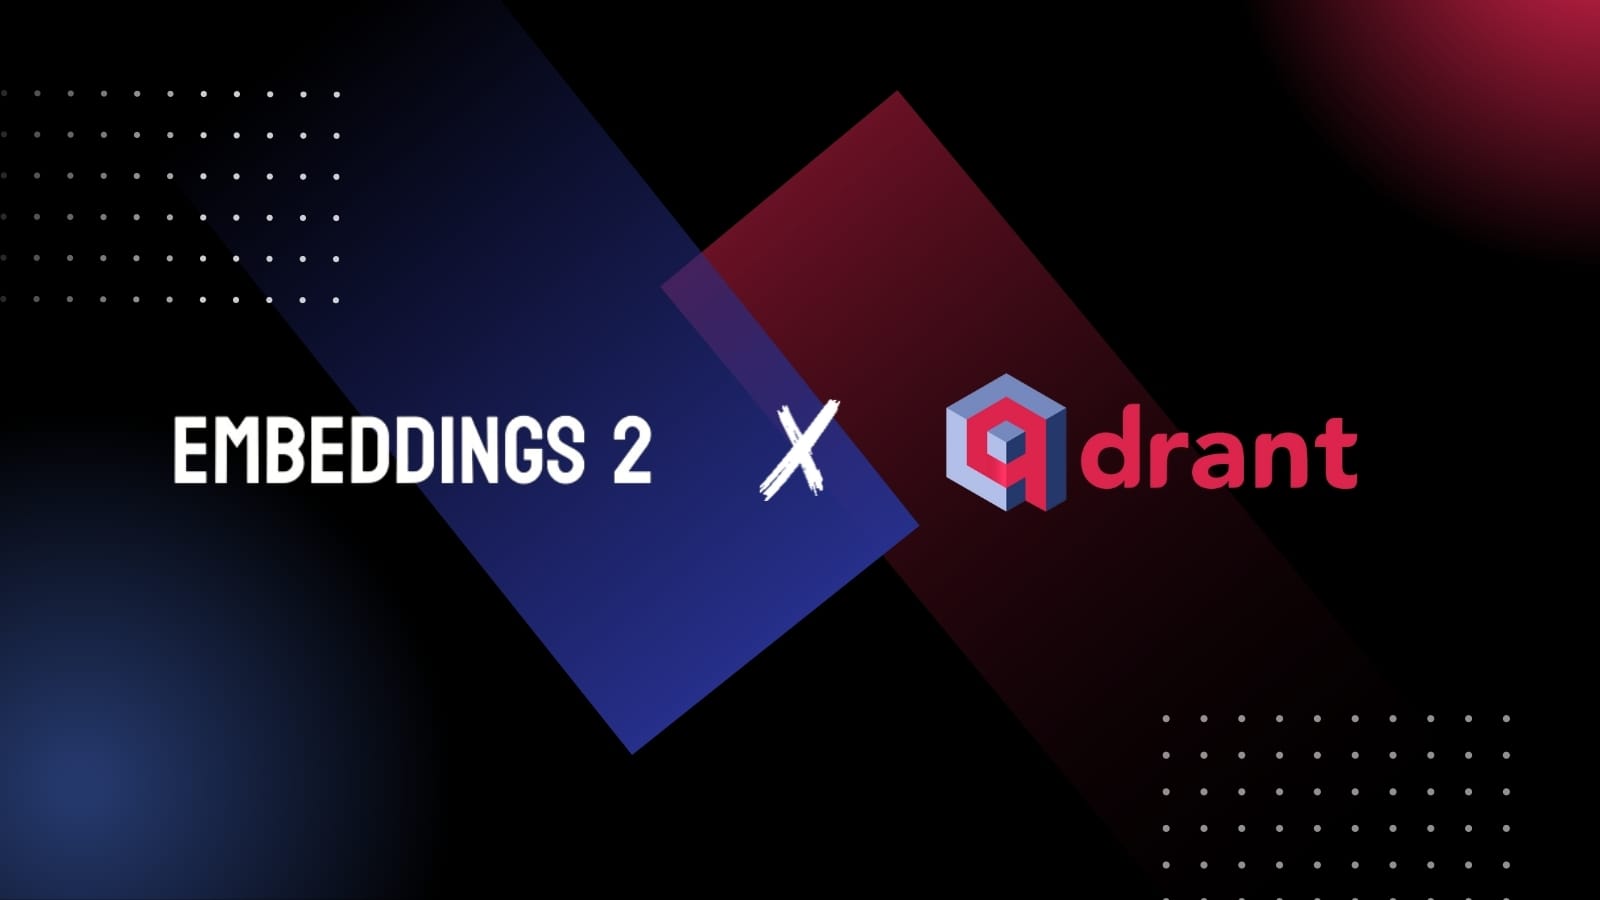 Promotional graphic with "EMBEDDINGS 2" and Drant logo separated by a red cross, symbolizing a partnership.